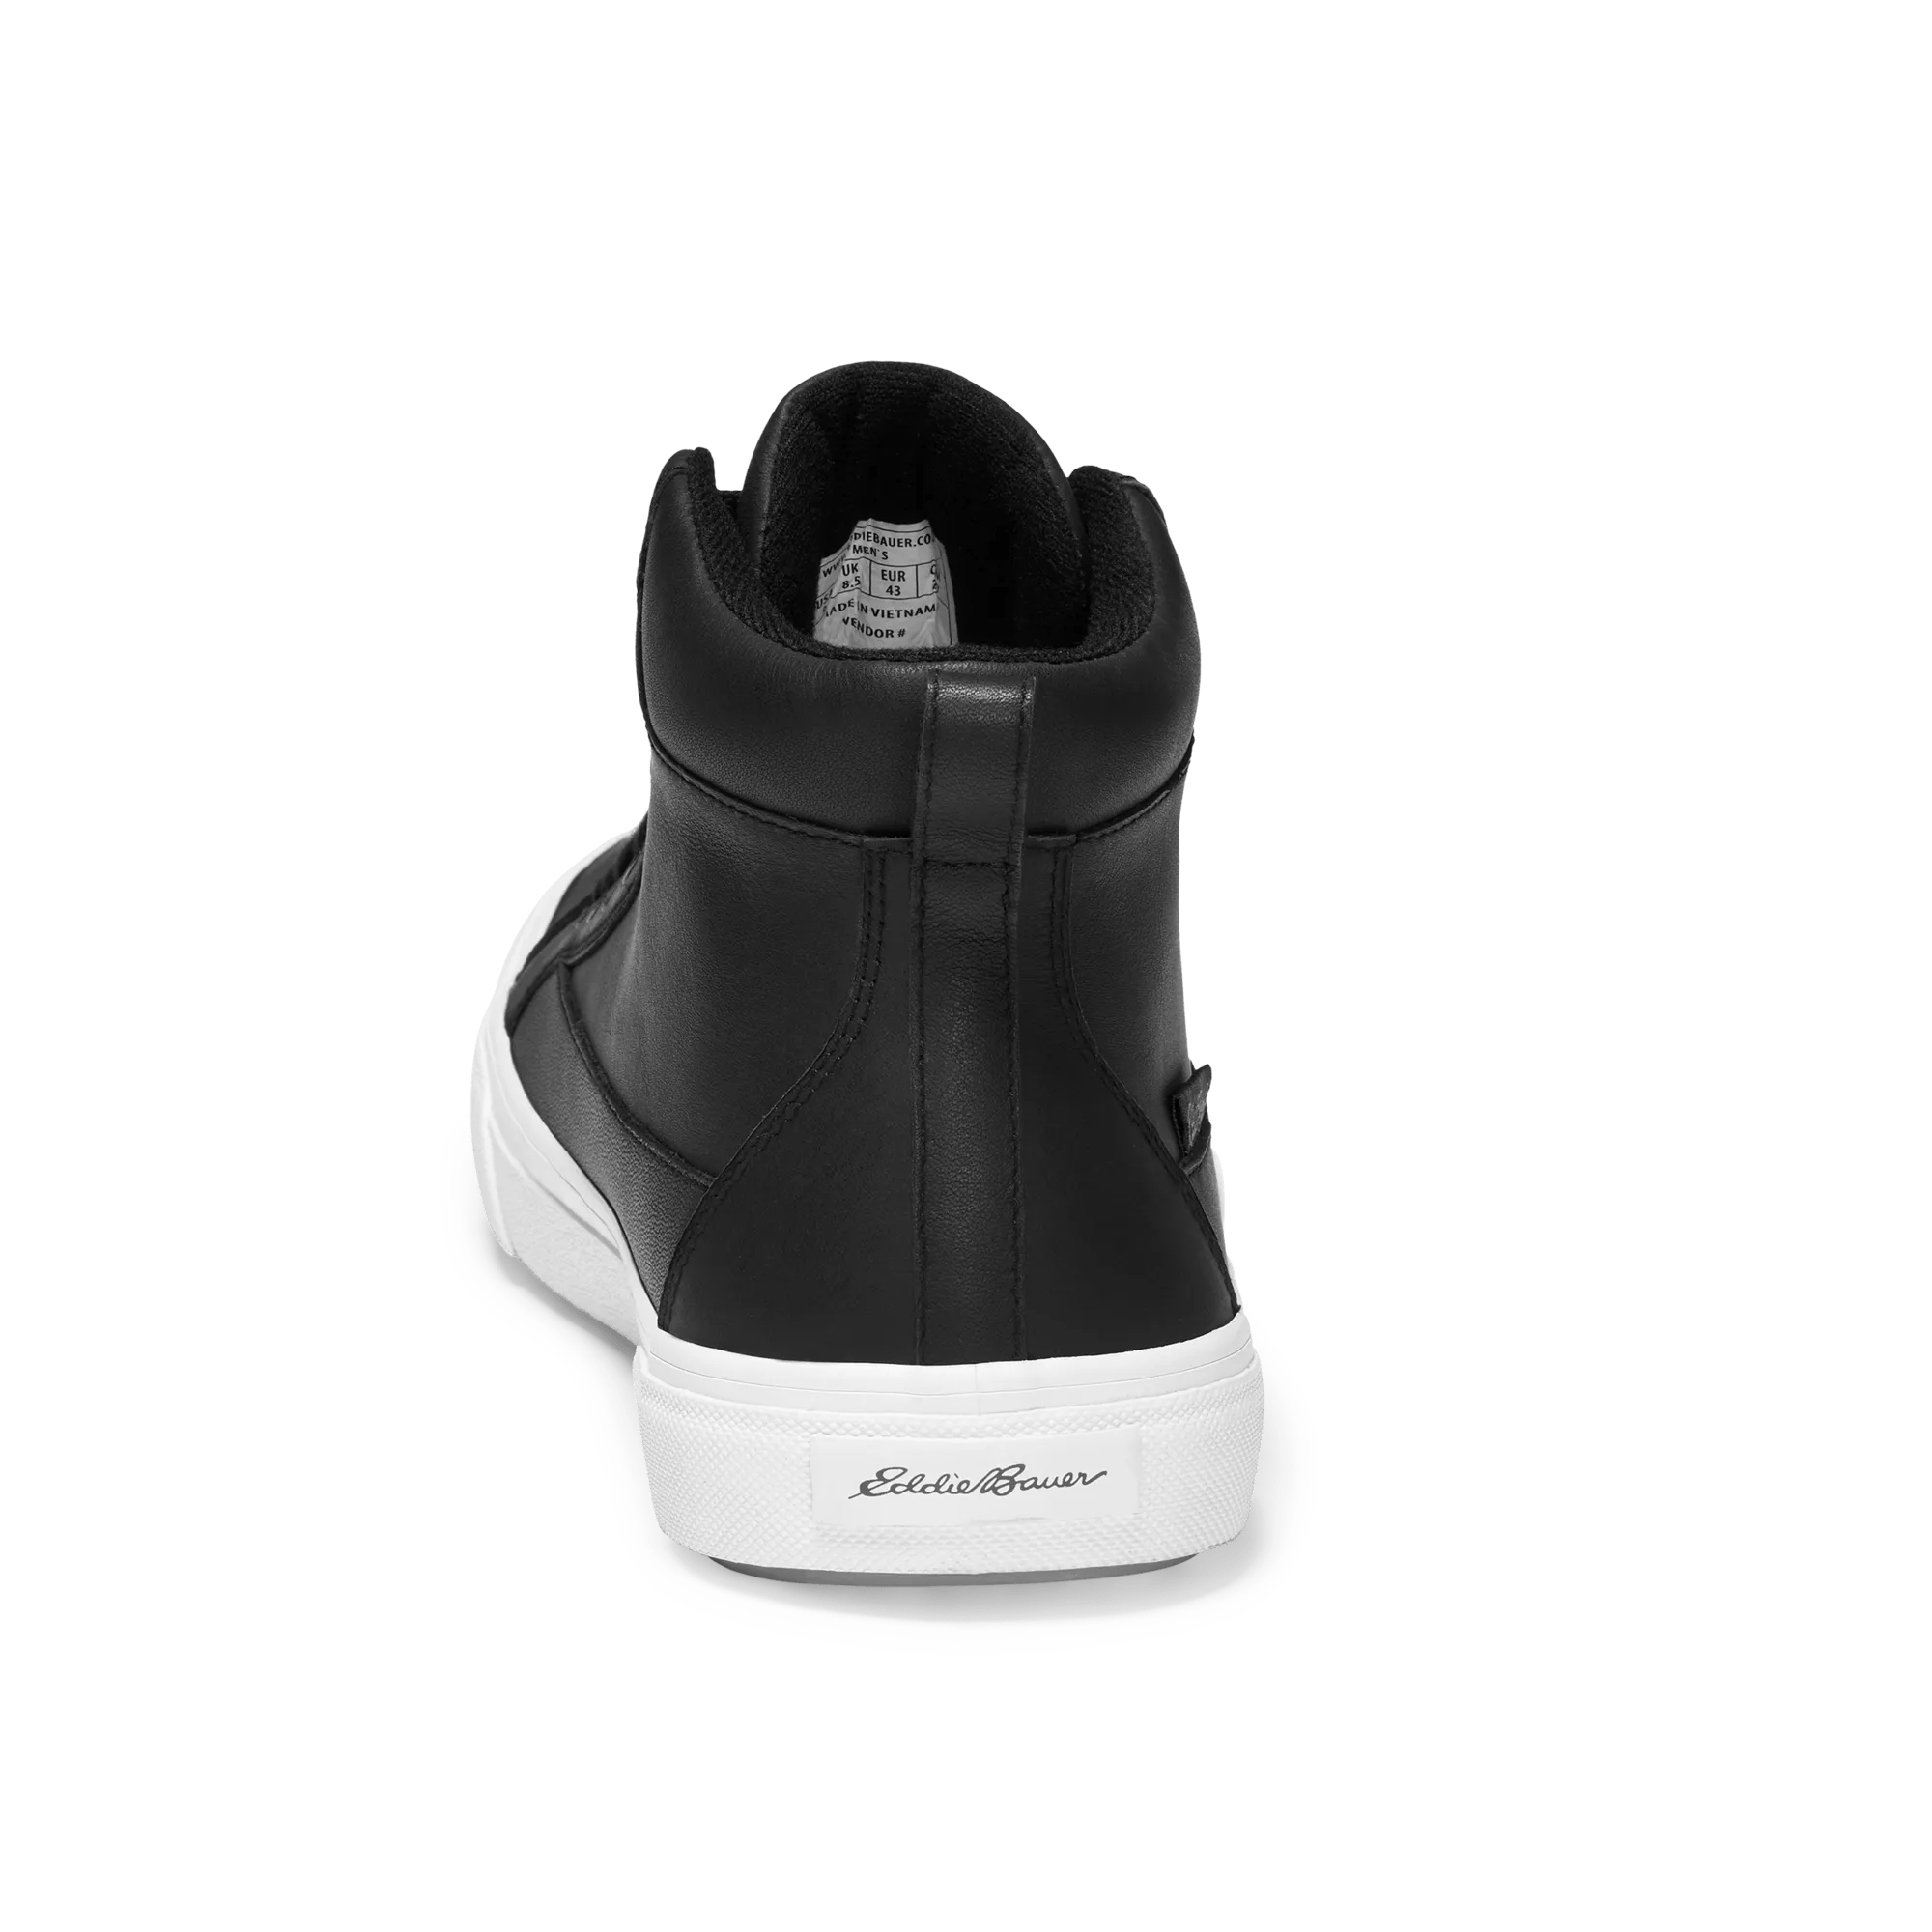 Storm Sneakers - Leather